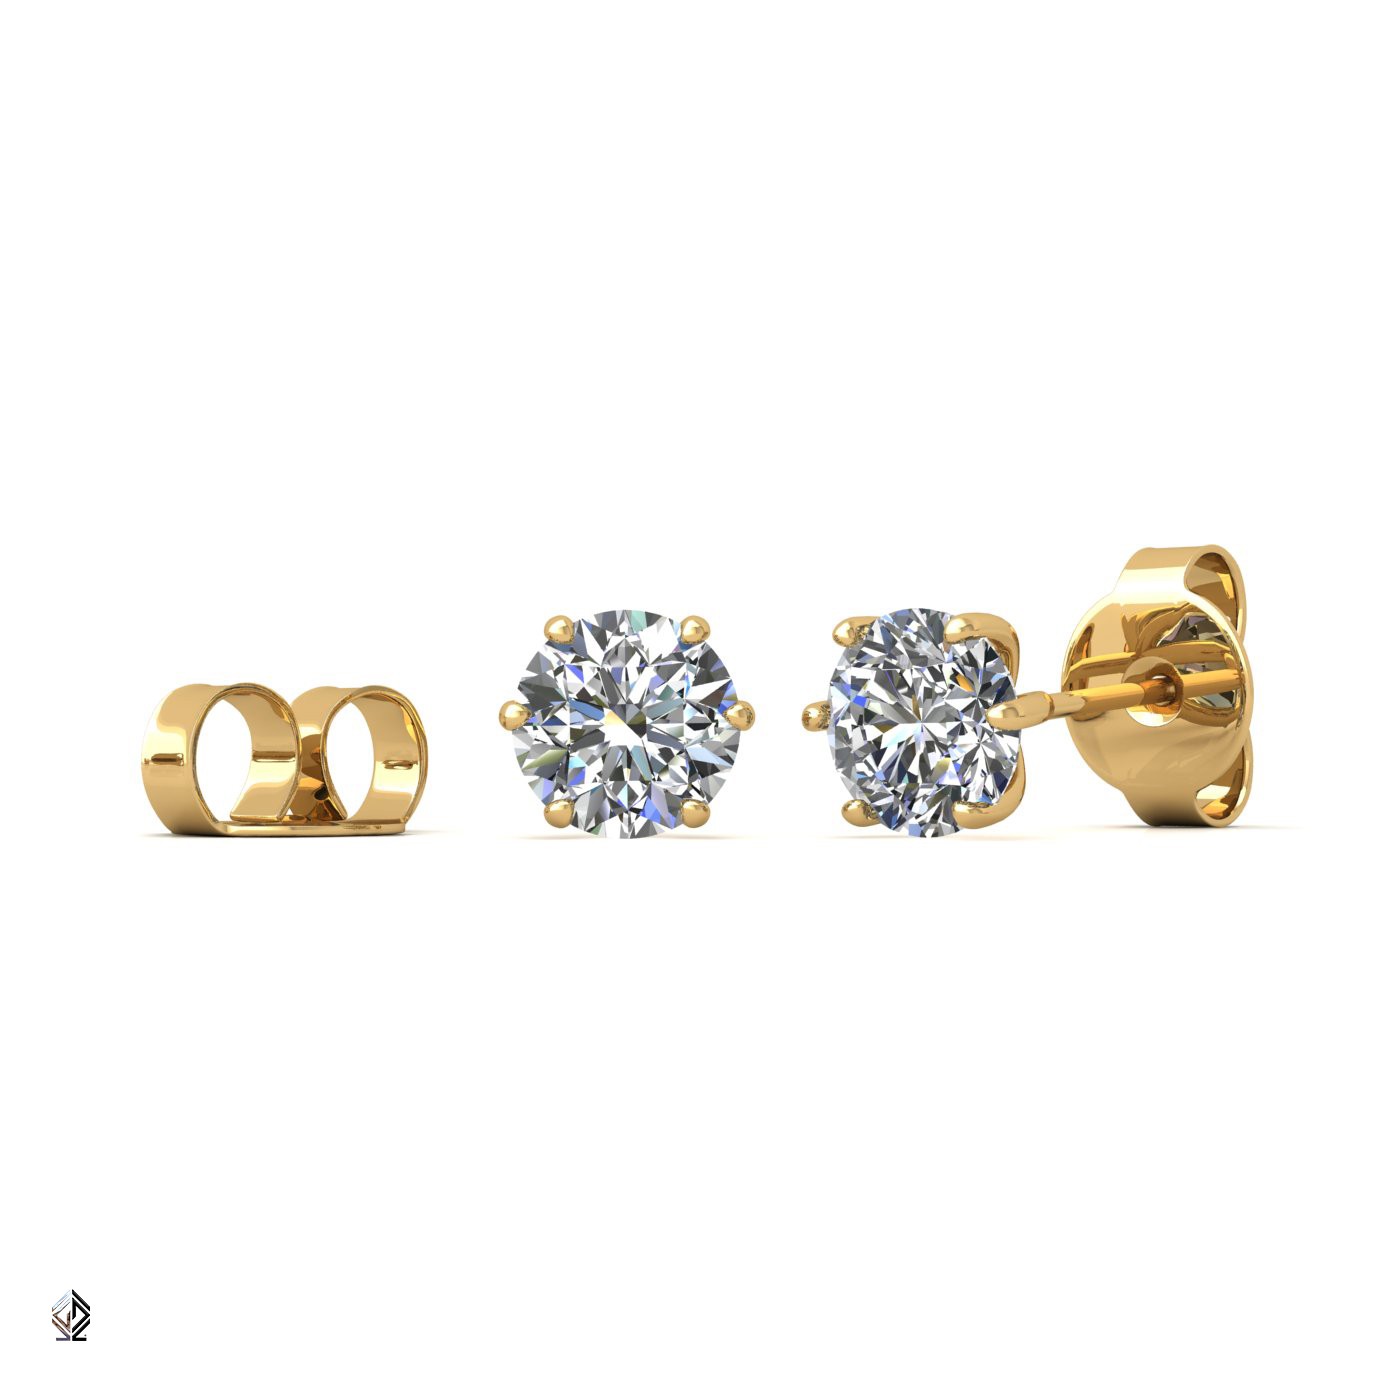 18k yellow gold 1.2 ct each (2,4 tcw) 6 prongs round shape diamond earrings Photos & images